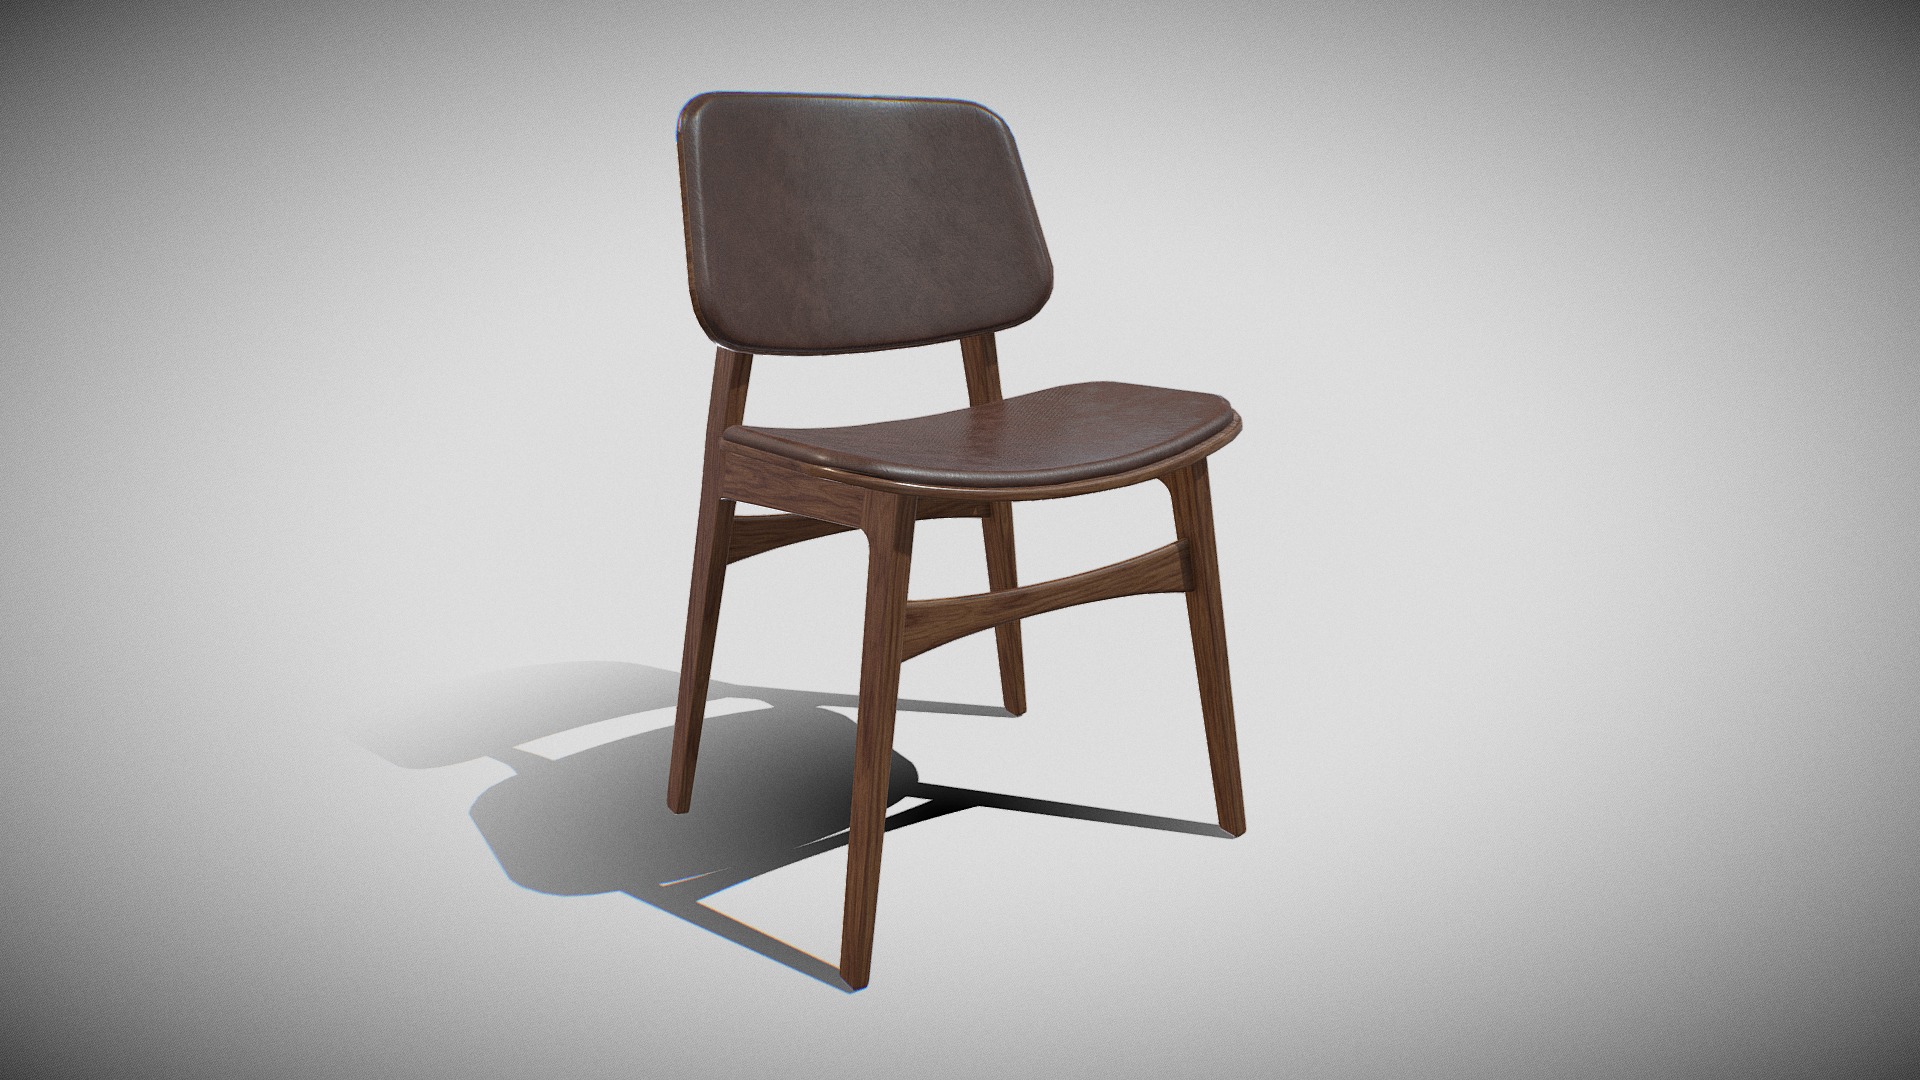 3D model Soborg Chair Model-3052-leather 96,oak smoked - This is a 3D model of the Soborg Chair Model-3052-leather 96,oak smoked. The 3D model is about a chair on a white background.